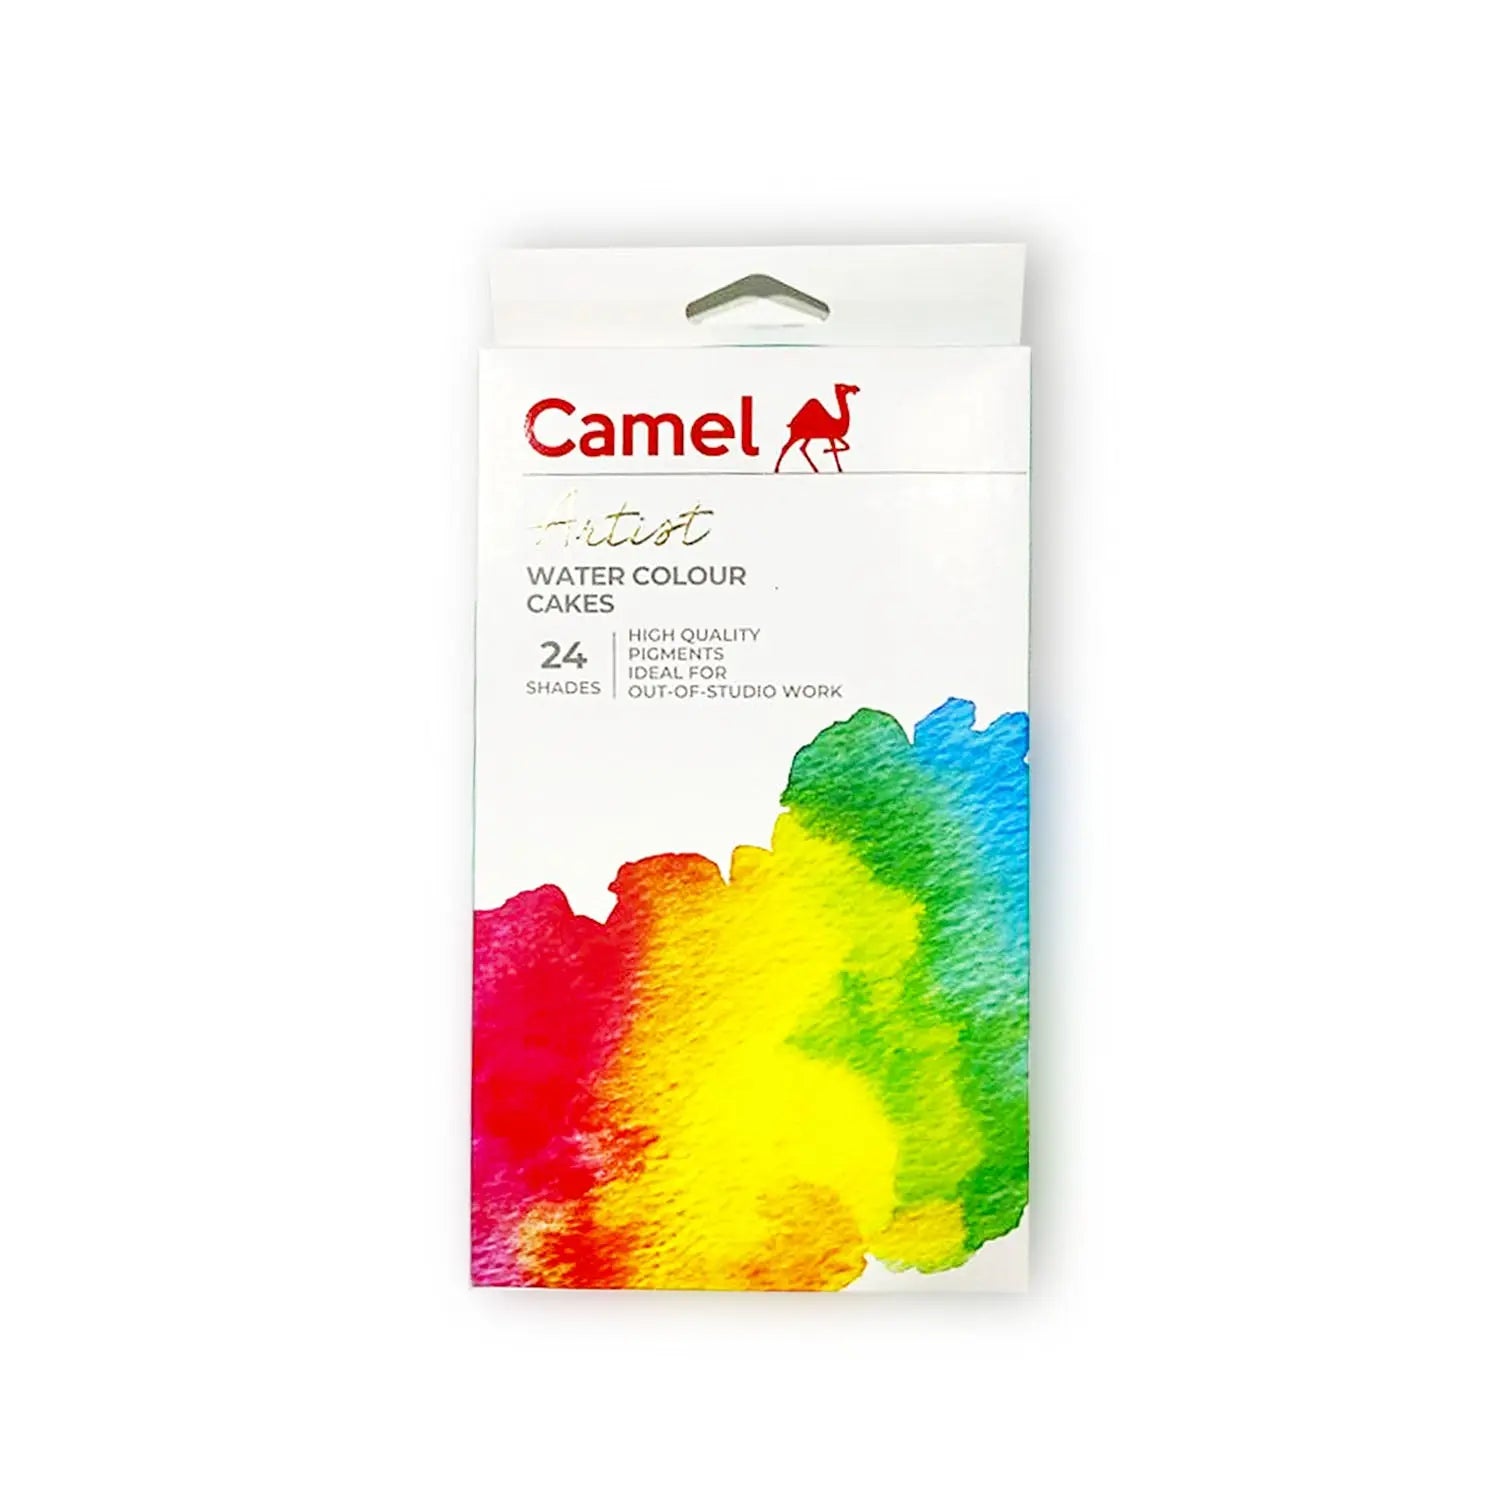 Camlin Water Colour Cakes 24 Shades, Packaging Type: Box